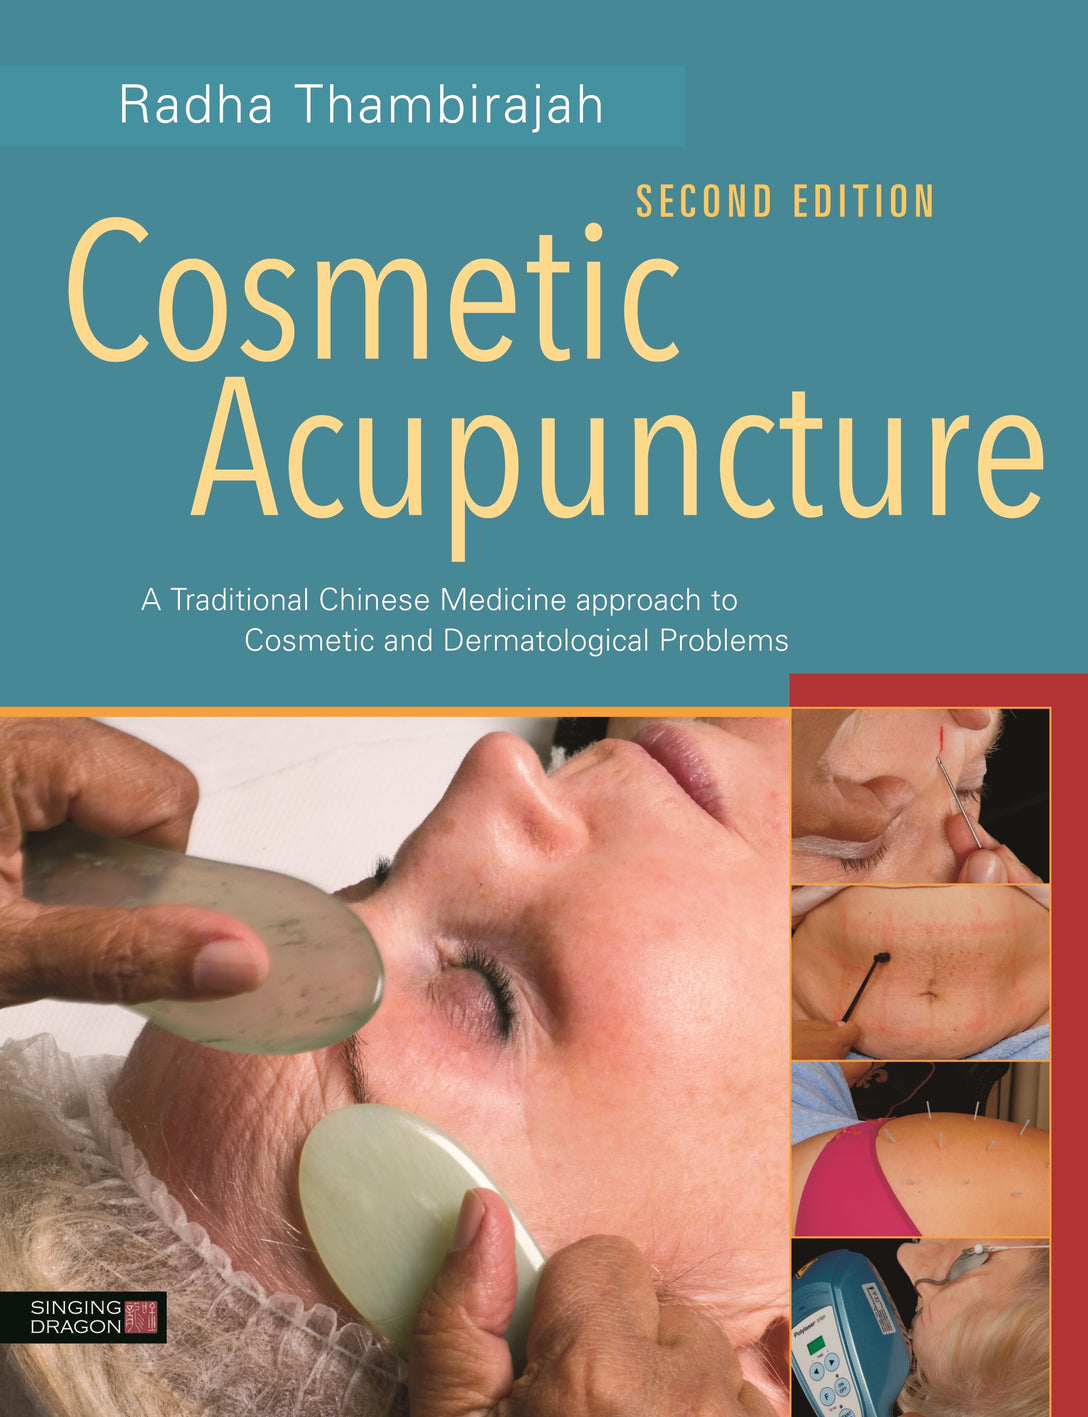 Cosmetic Acupuncture, Second Edition by Radha Thambirajah